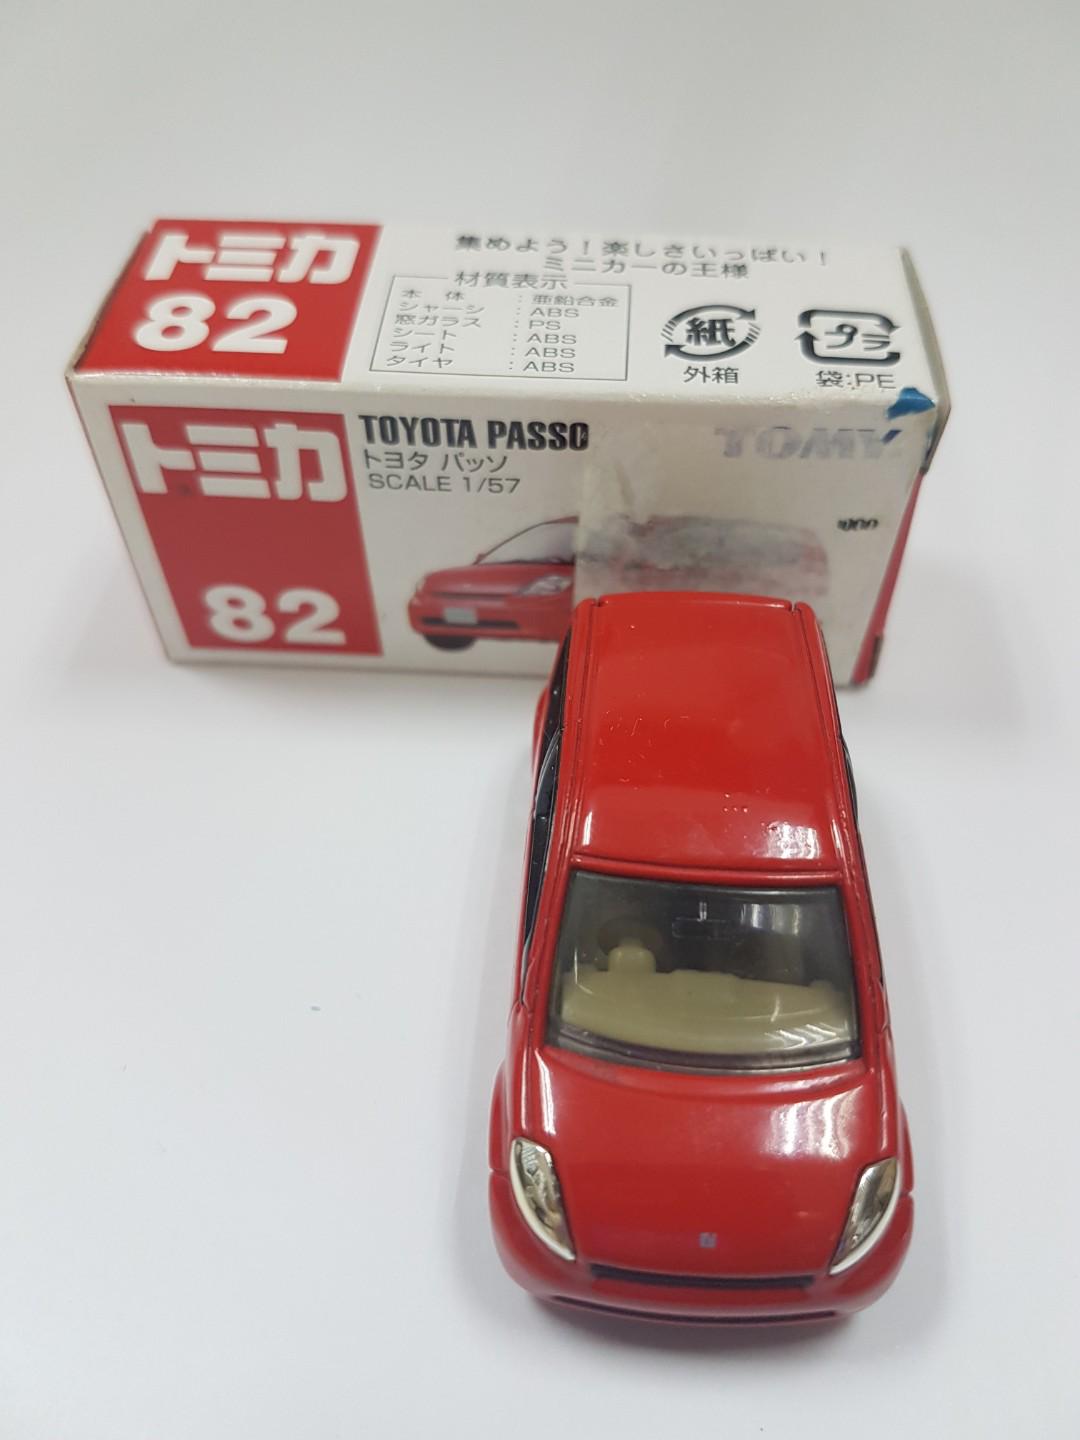 TOMICA TOMY 82- 1:57 SCALE TOYOTA PASSO MINI CAR - RED 